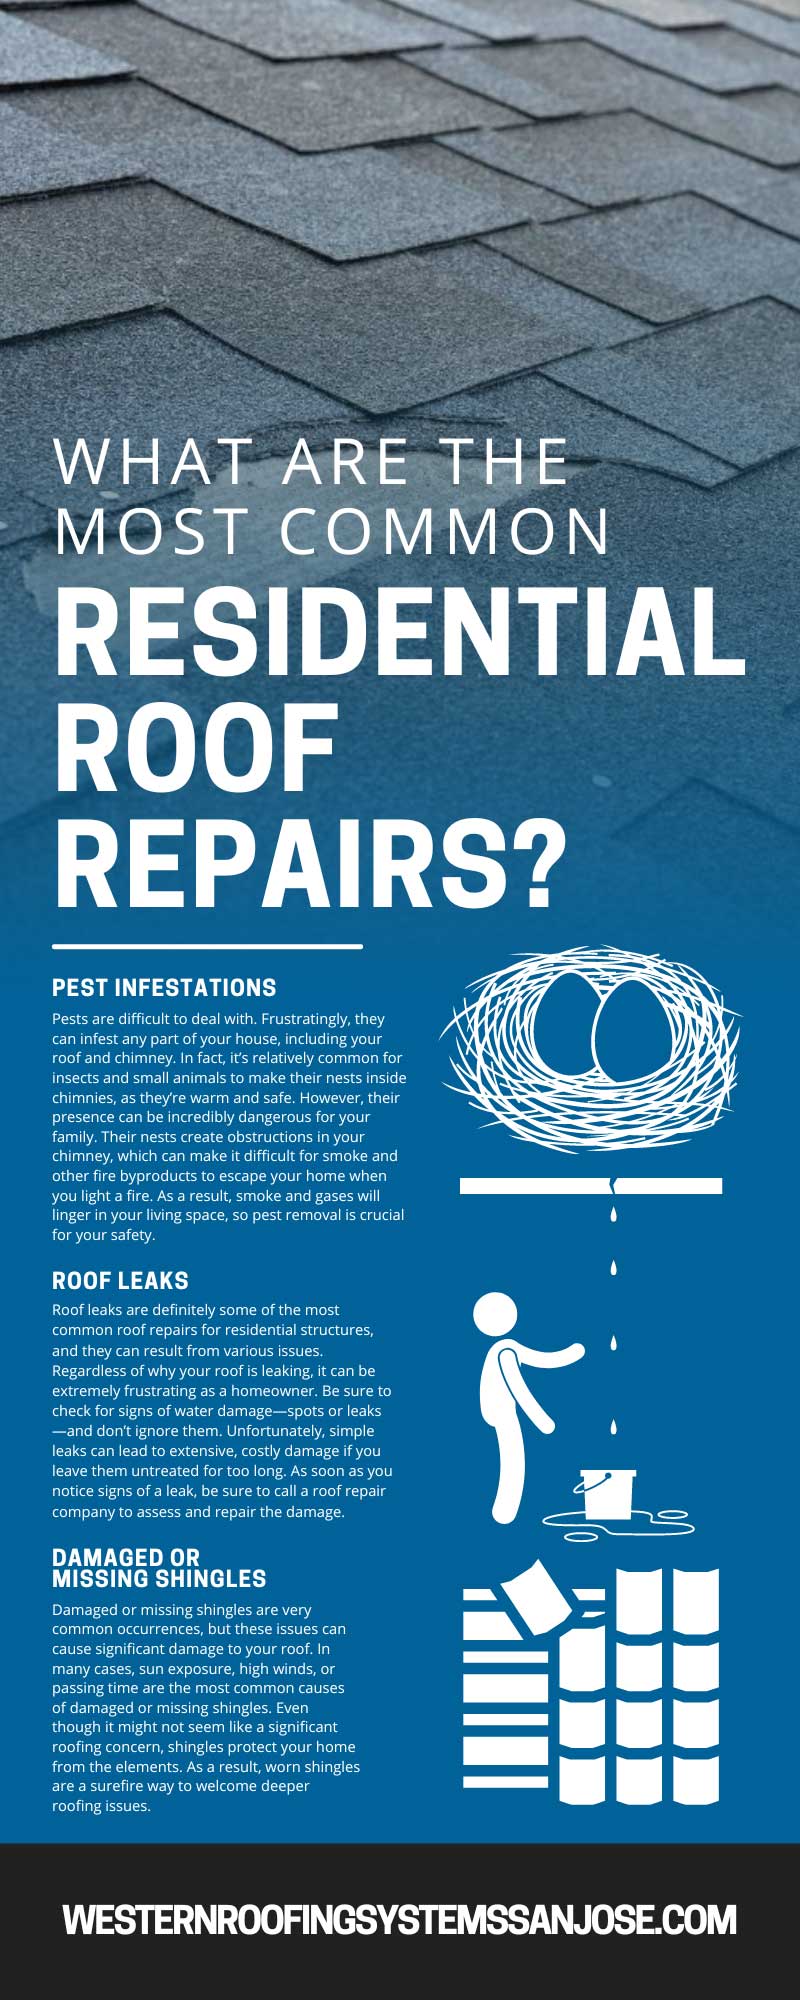 What Are the Most Common Residential Roof Repairs?